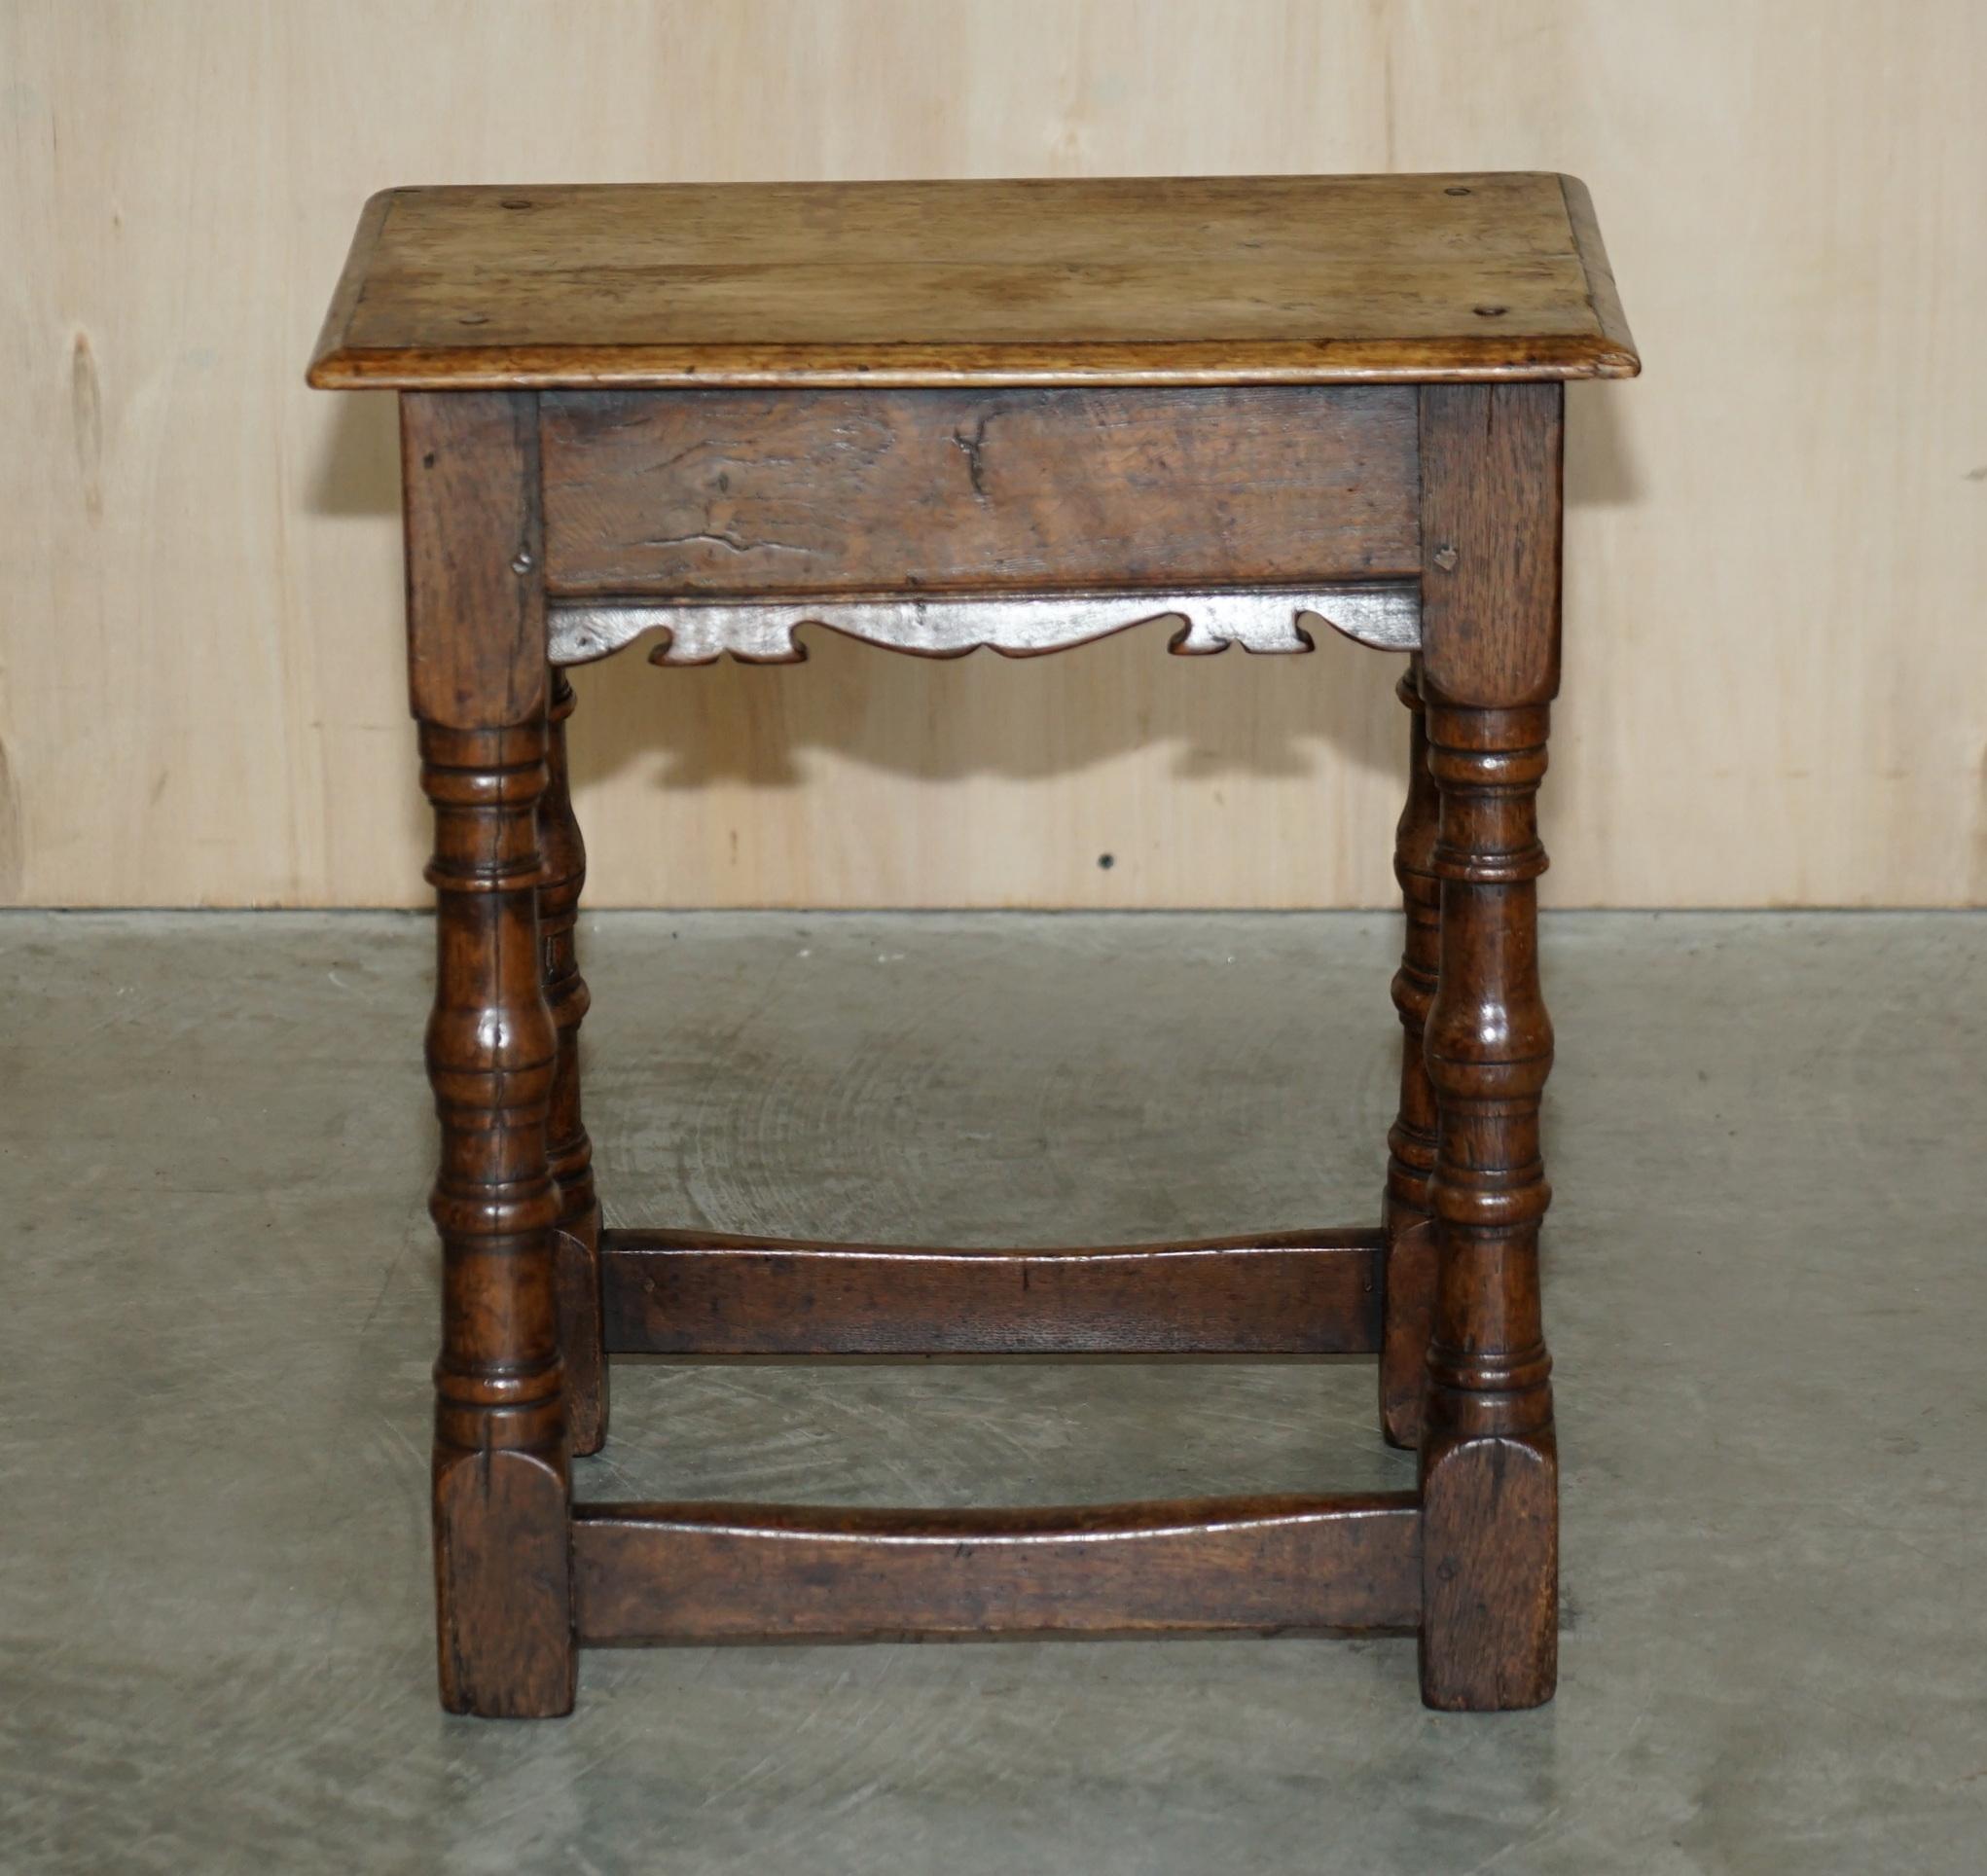 We are delighted to offer for sale this stunning 18th century circa 1760 oak jointed stool or side table with original wood nail dowels 

A nicely made genuine 260+ year old piece, beautifully carved and primitively made single pieces of English